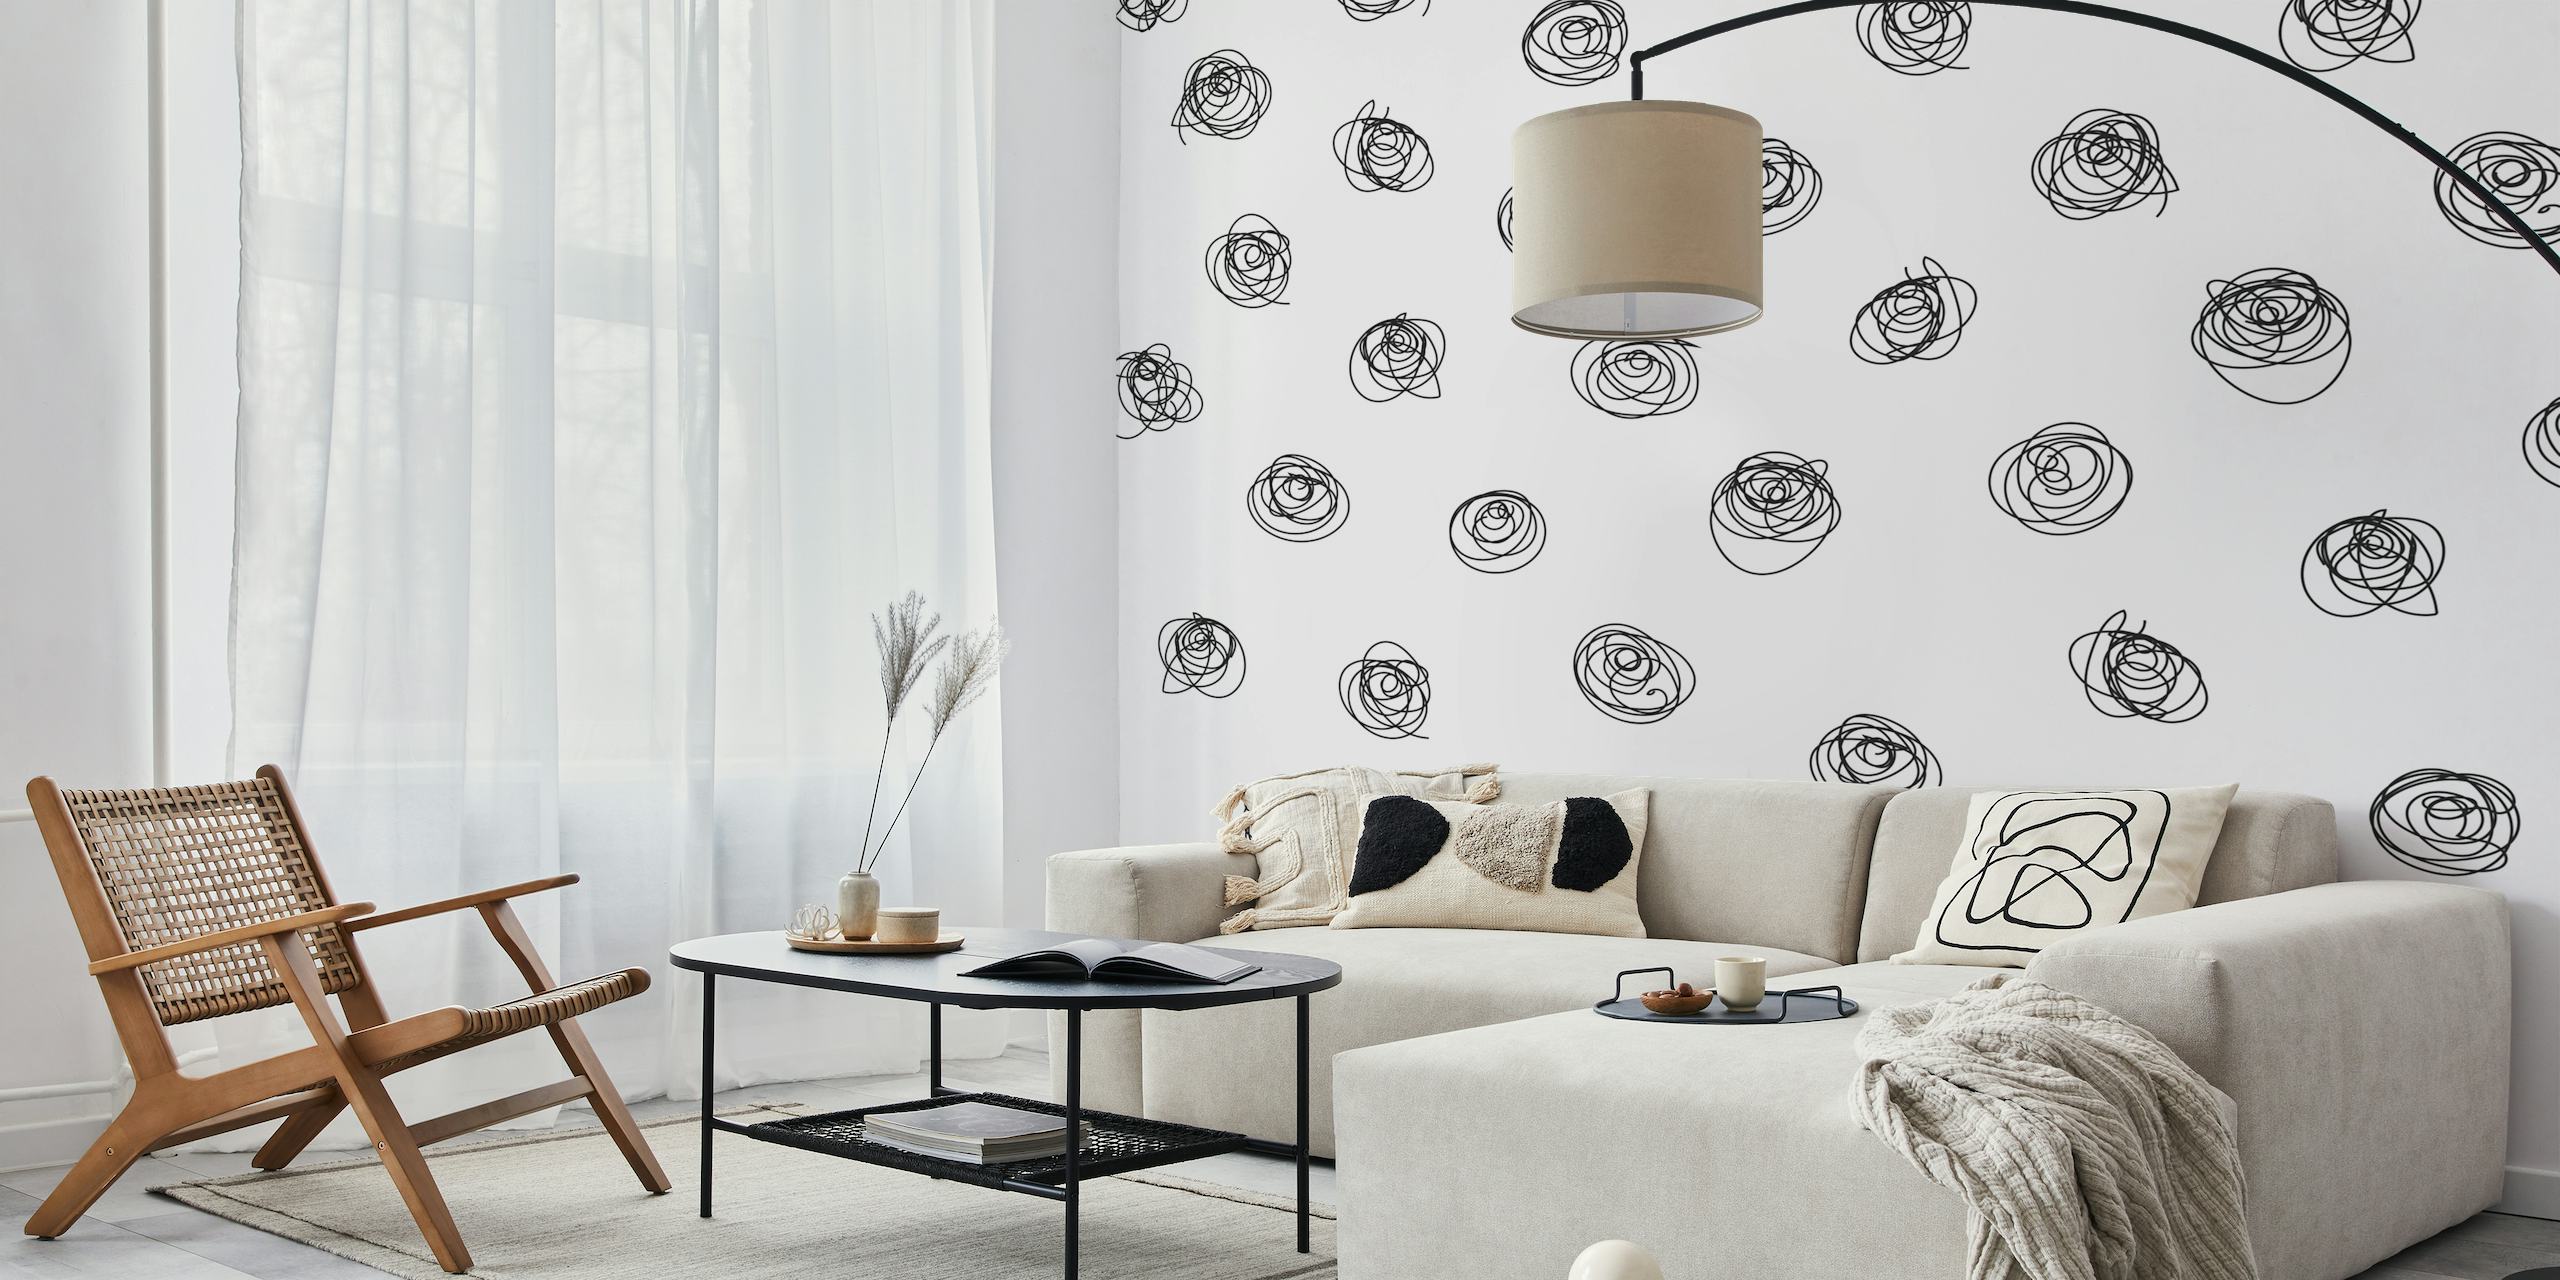 Abstract sketched circles wall mural from happywall.com